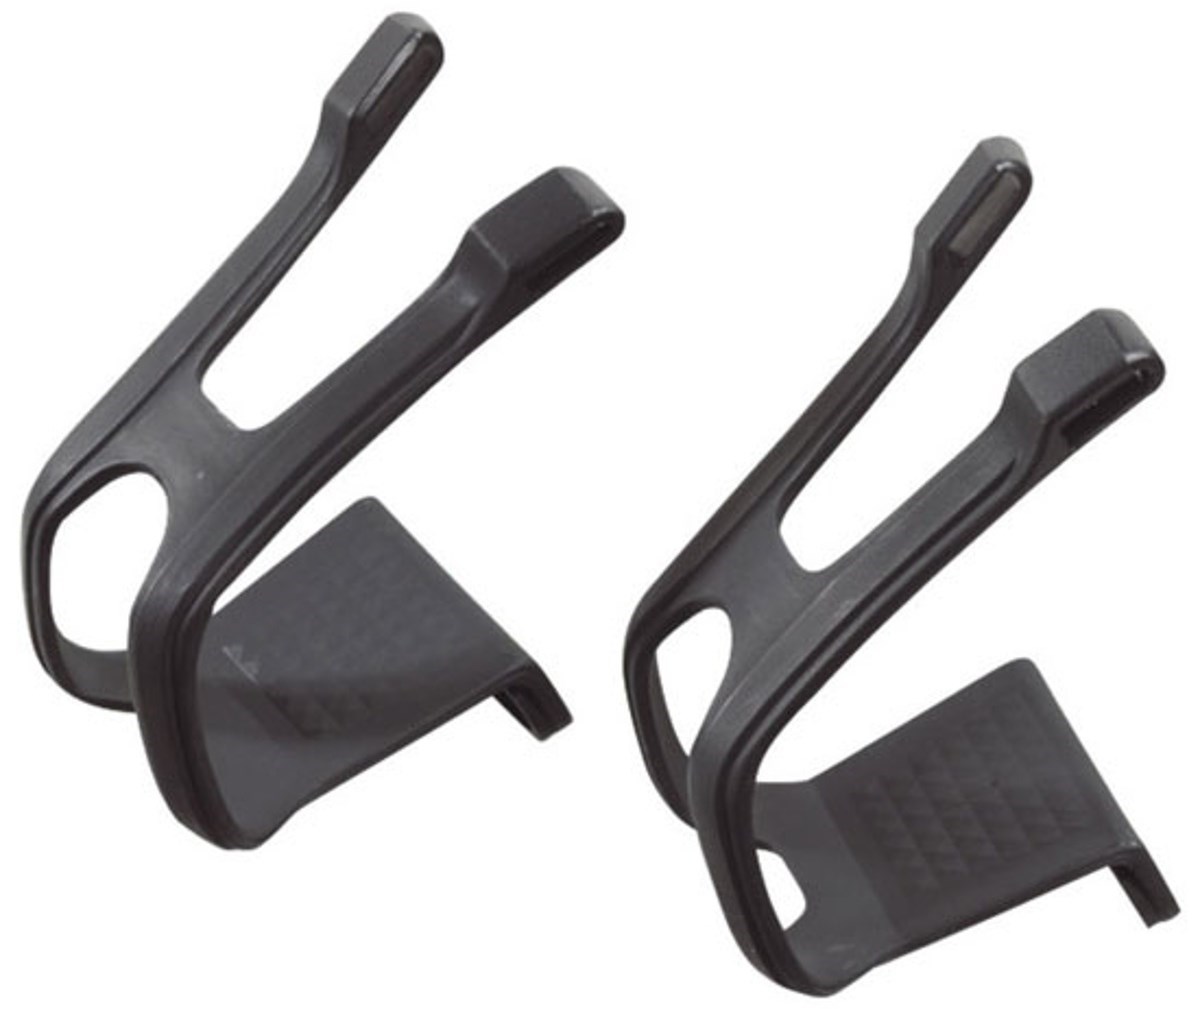 Raleigh Toeclips + Straps product image